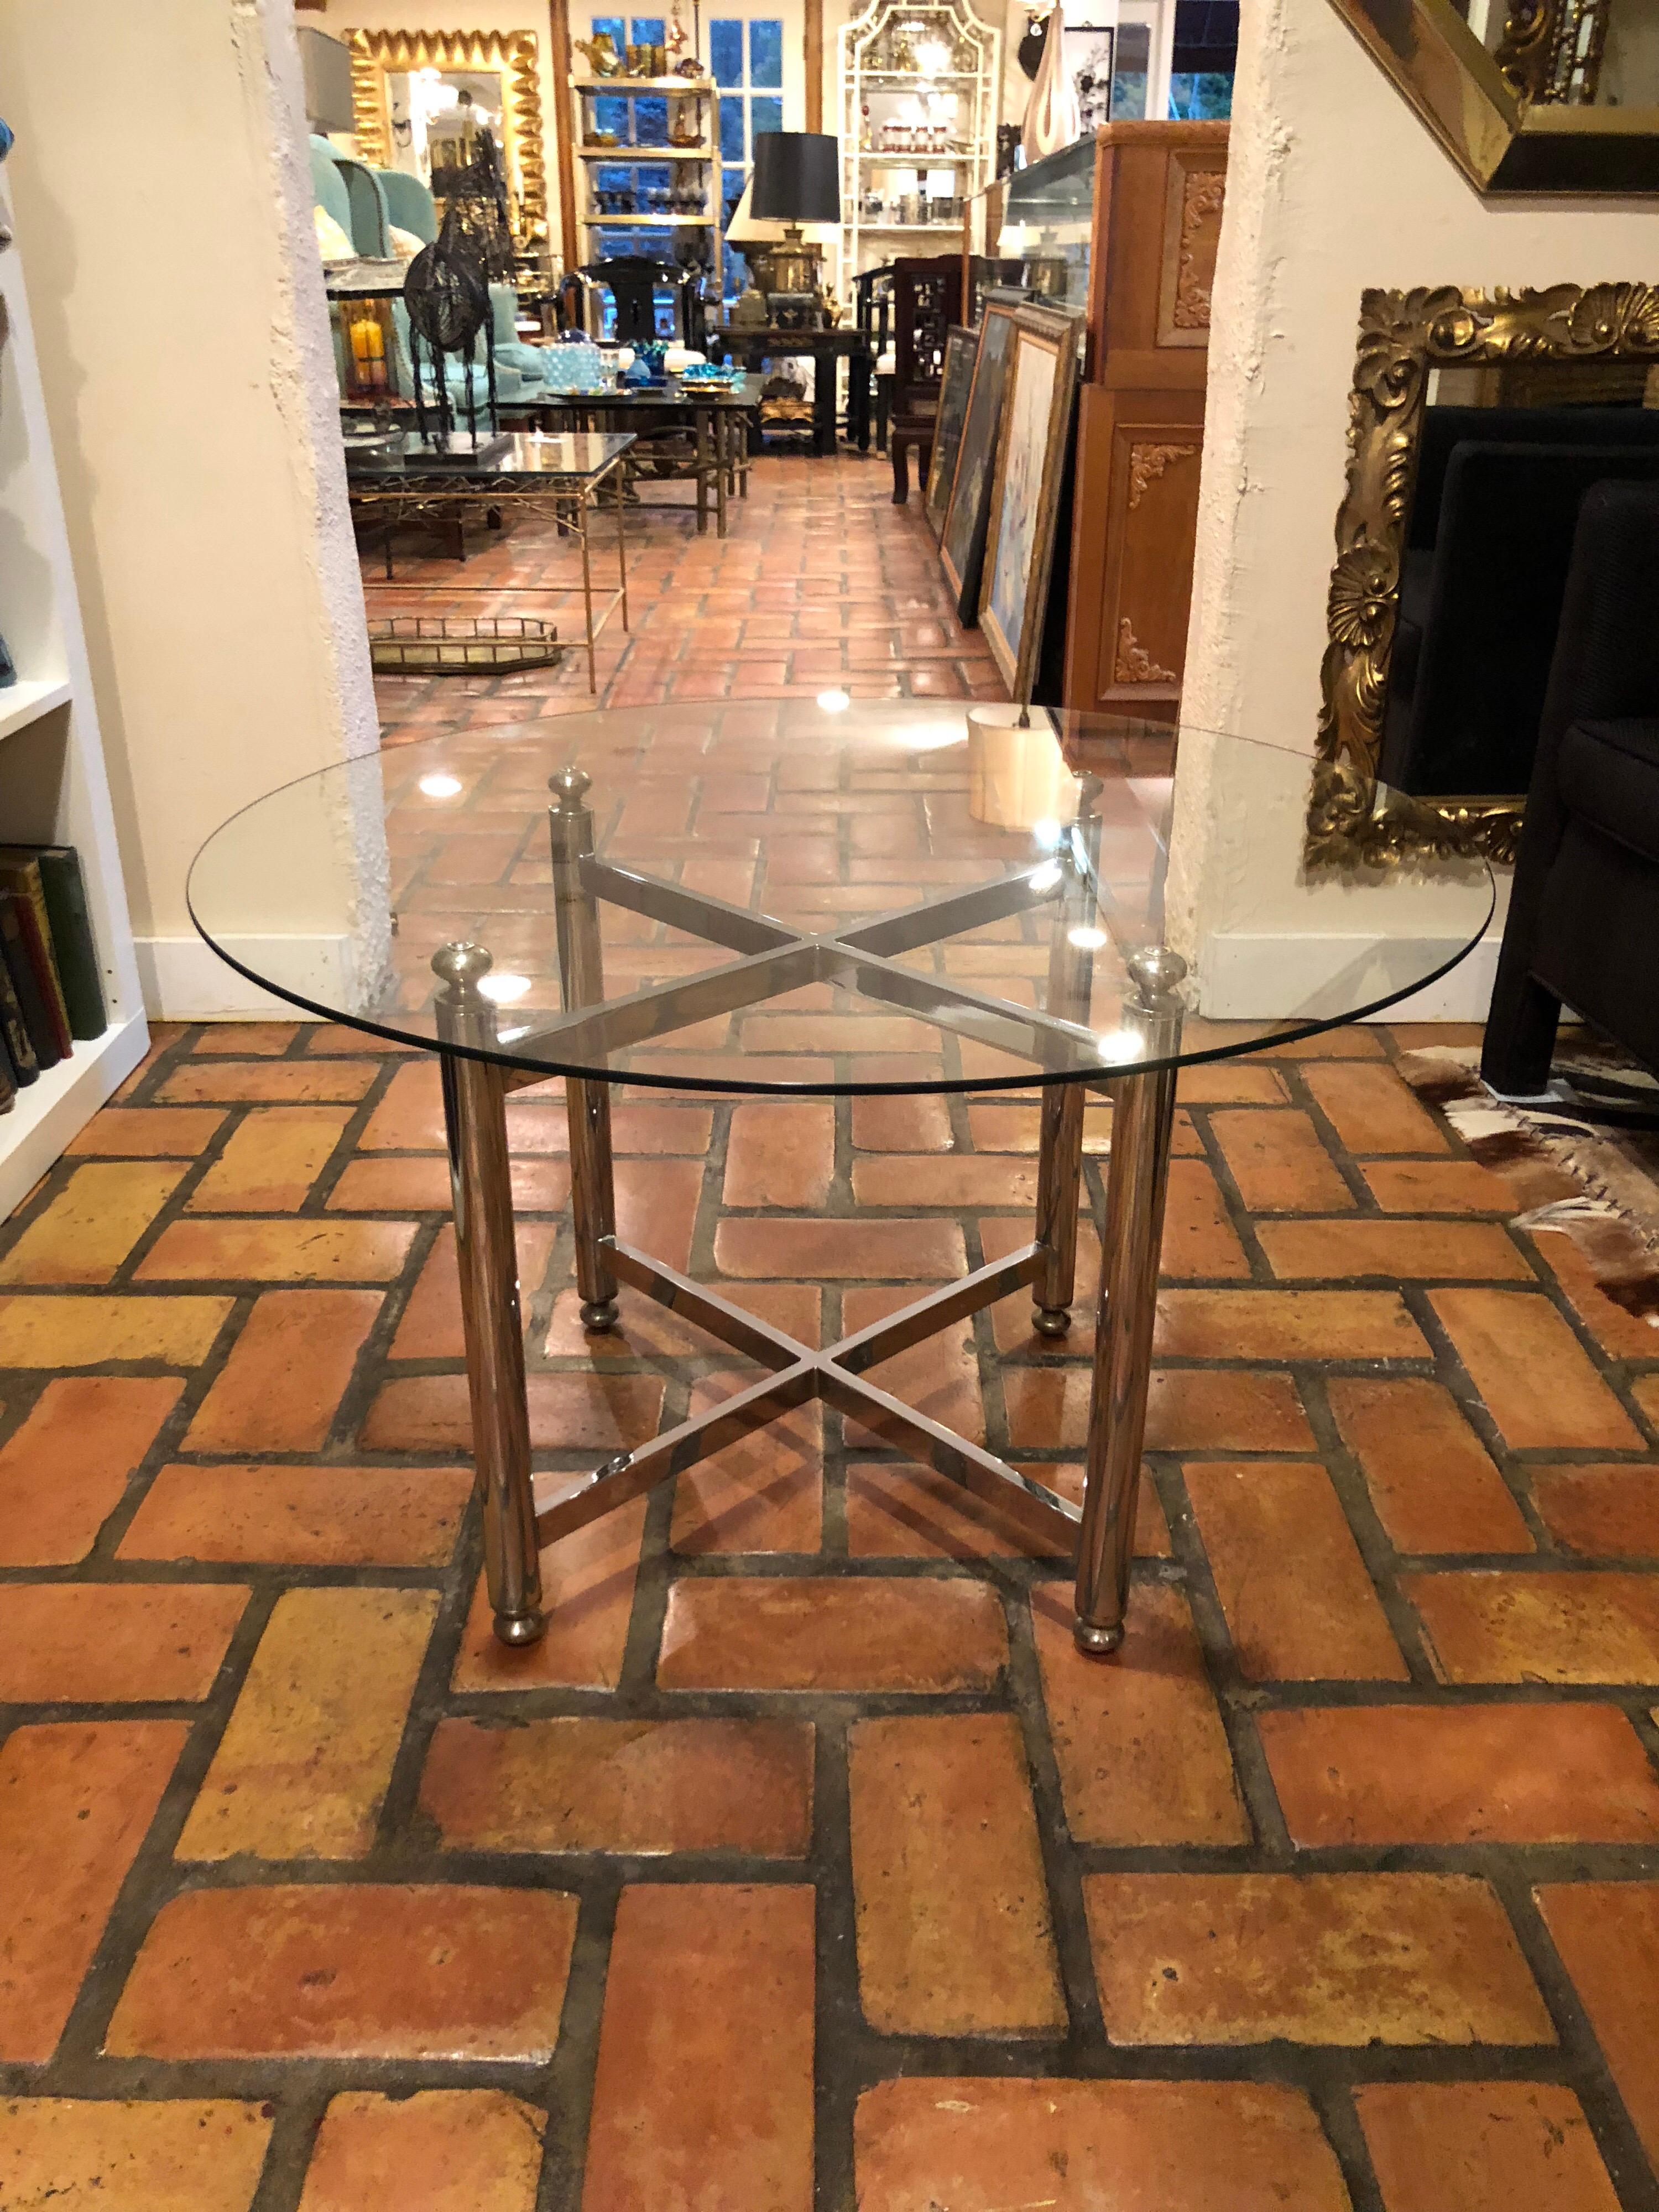 Maison Jansen style round chrome, brass and glass table. Nice round modernist, clean style. X cross stretcher design with round finial tops. Perfect for that Minimalist modern decor or Hollywood regency style home. Glass top can also be made smaller